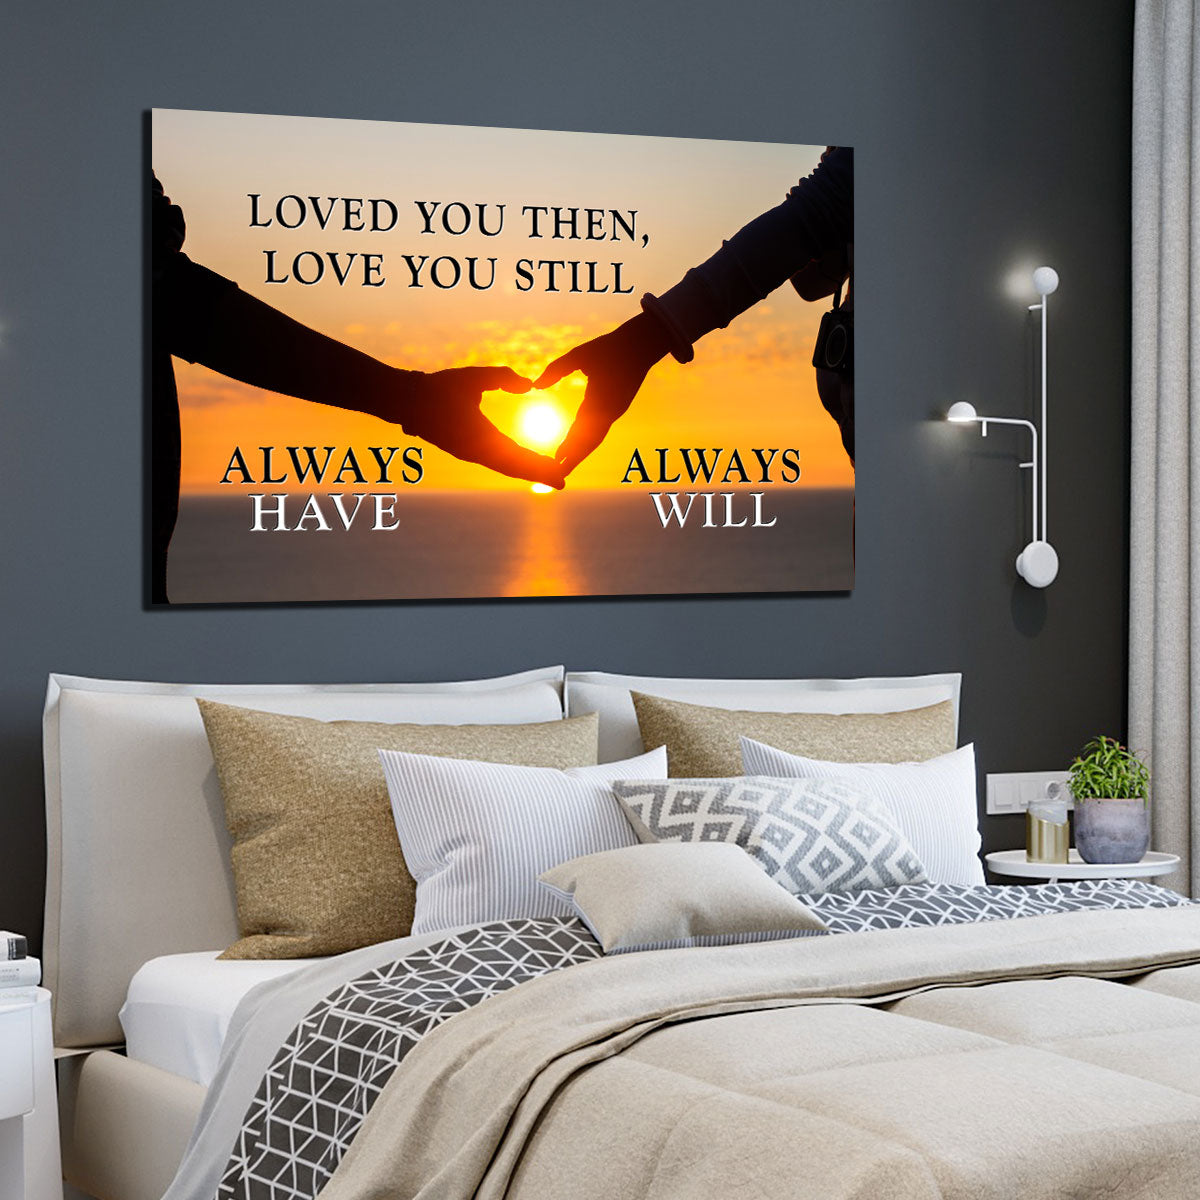 "Loved You Then, Love You Still, Always Have, Always Will." sunset canvas wall art